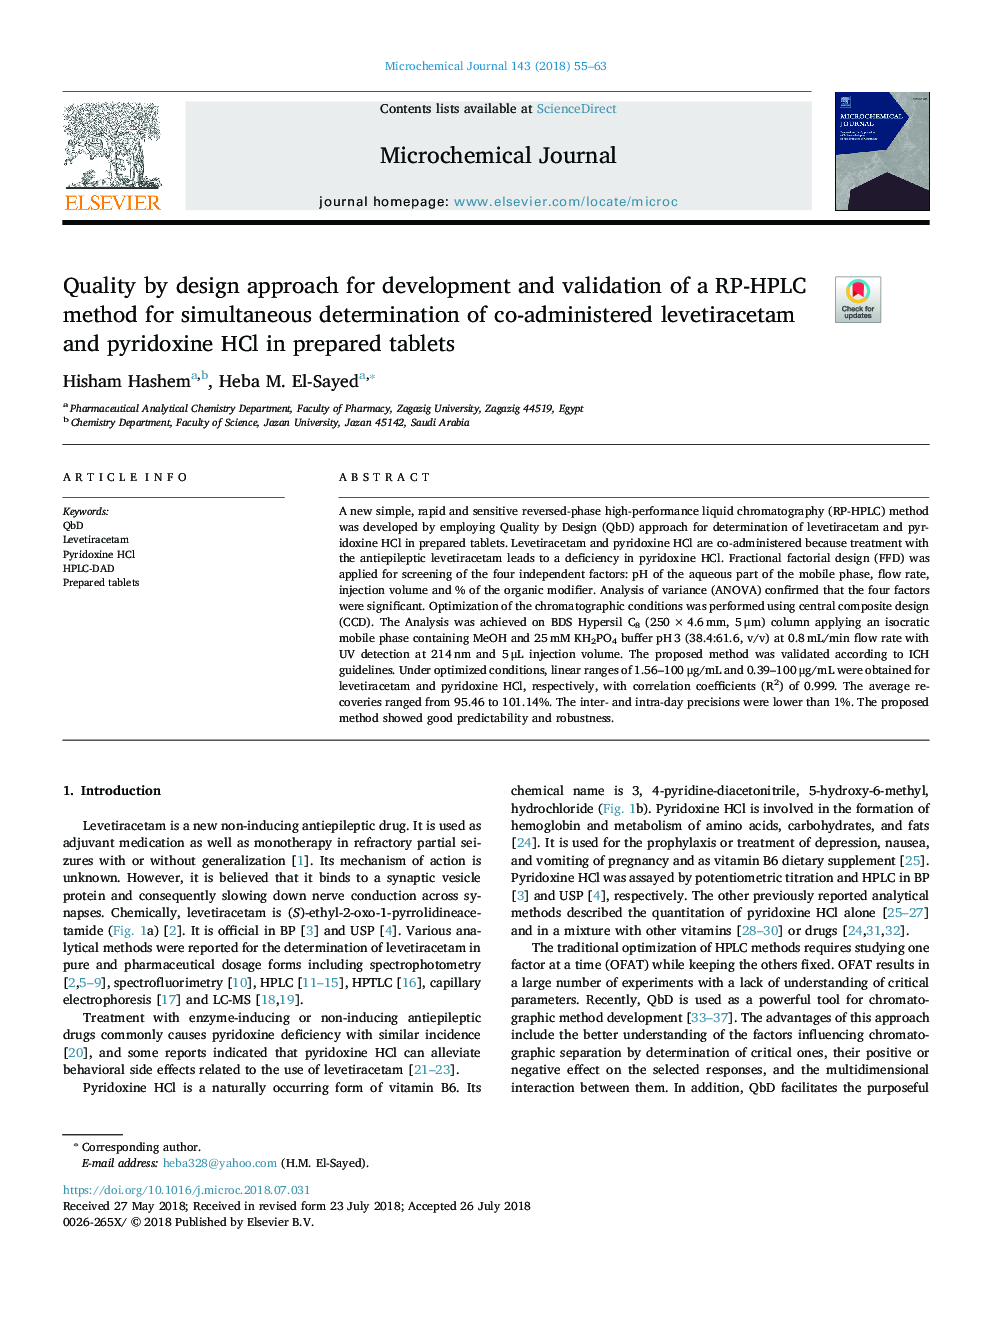 Quality by design approach for development and validation of a RP-HPLC method for simultaneous determination of co-administered levetiracetam and pyridoxine HCl in prepared tablets